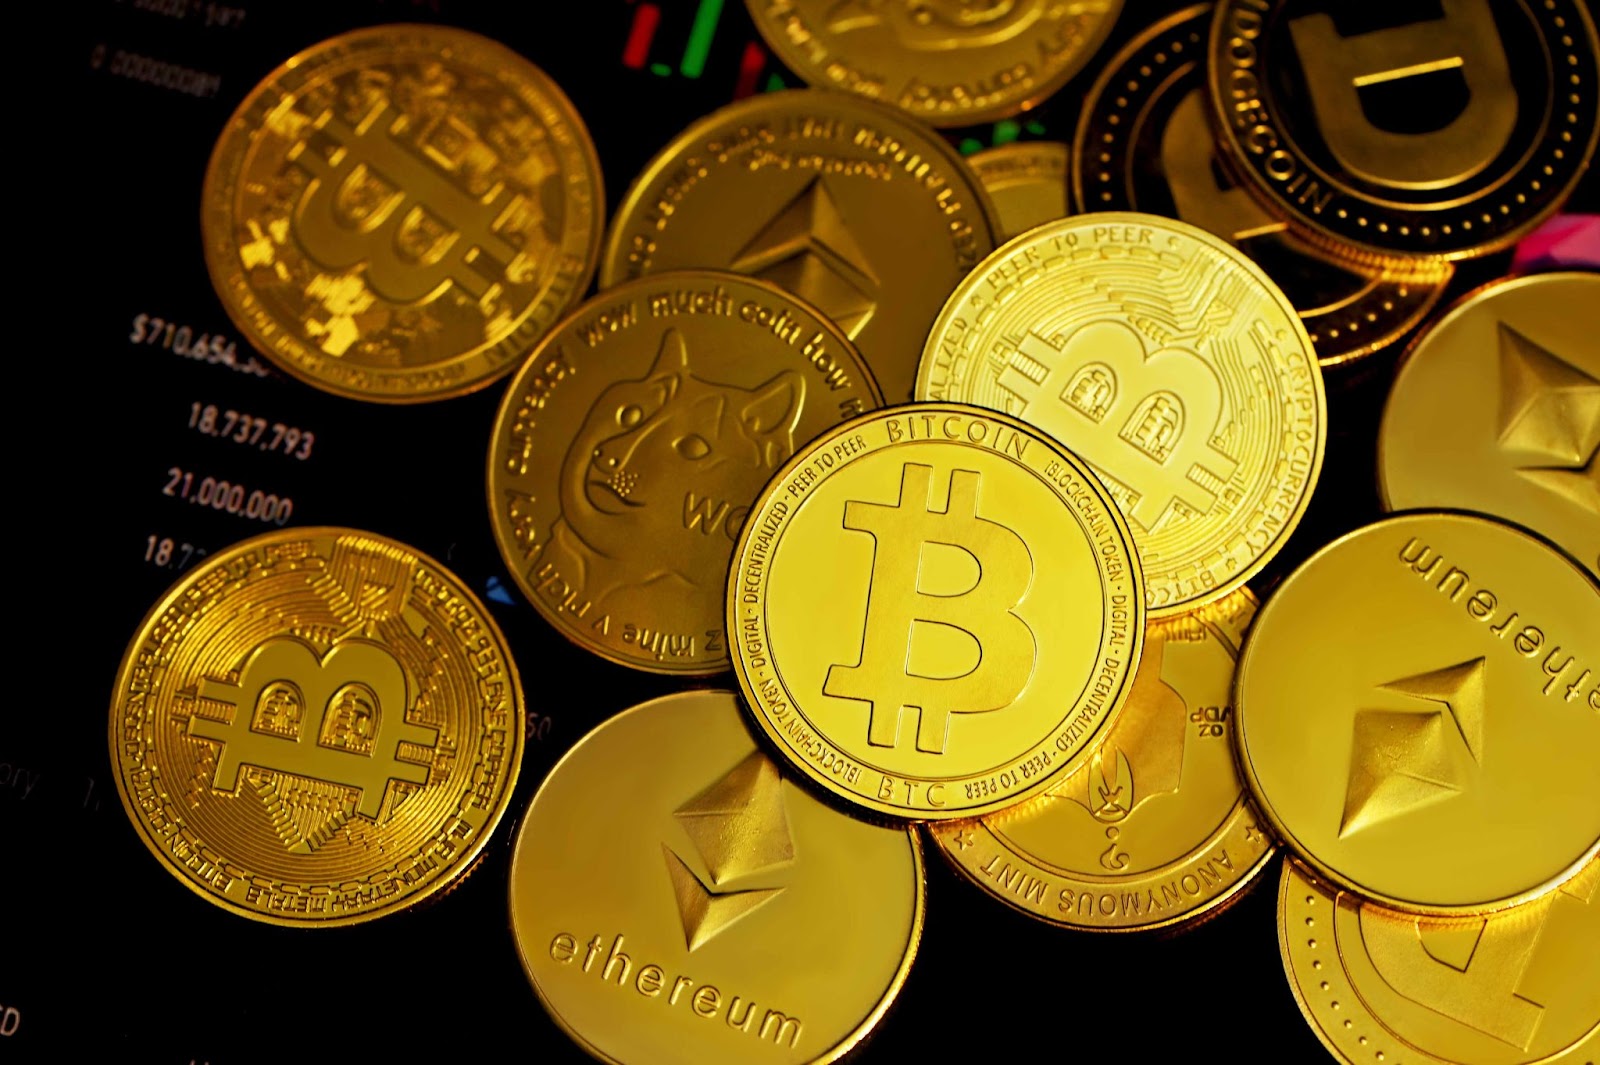 Image of gold coins with cryptocurrency logos. 